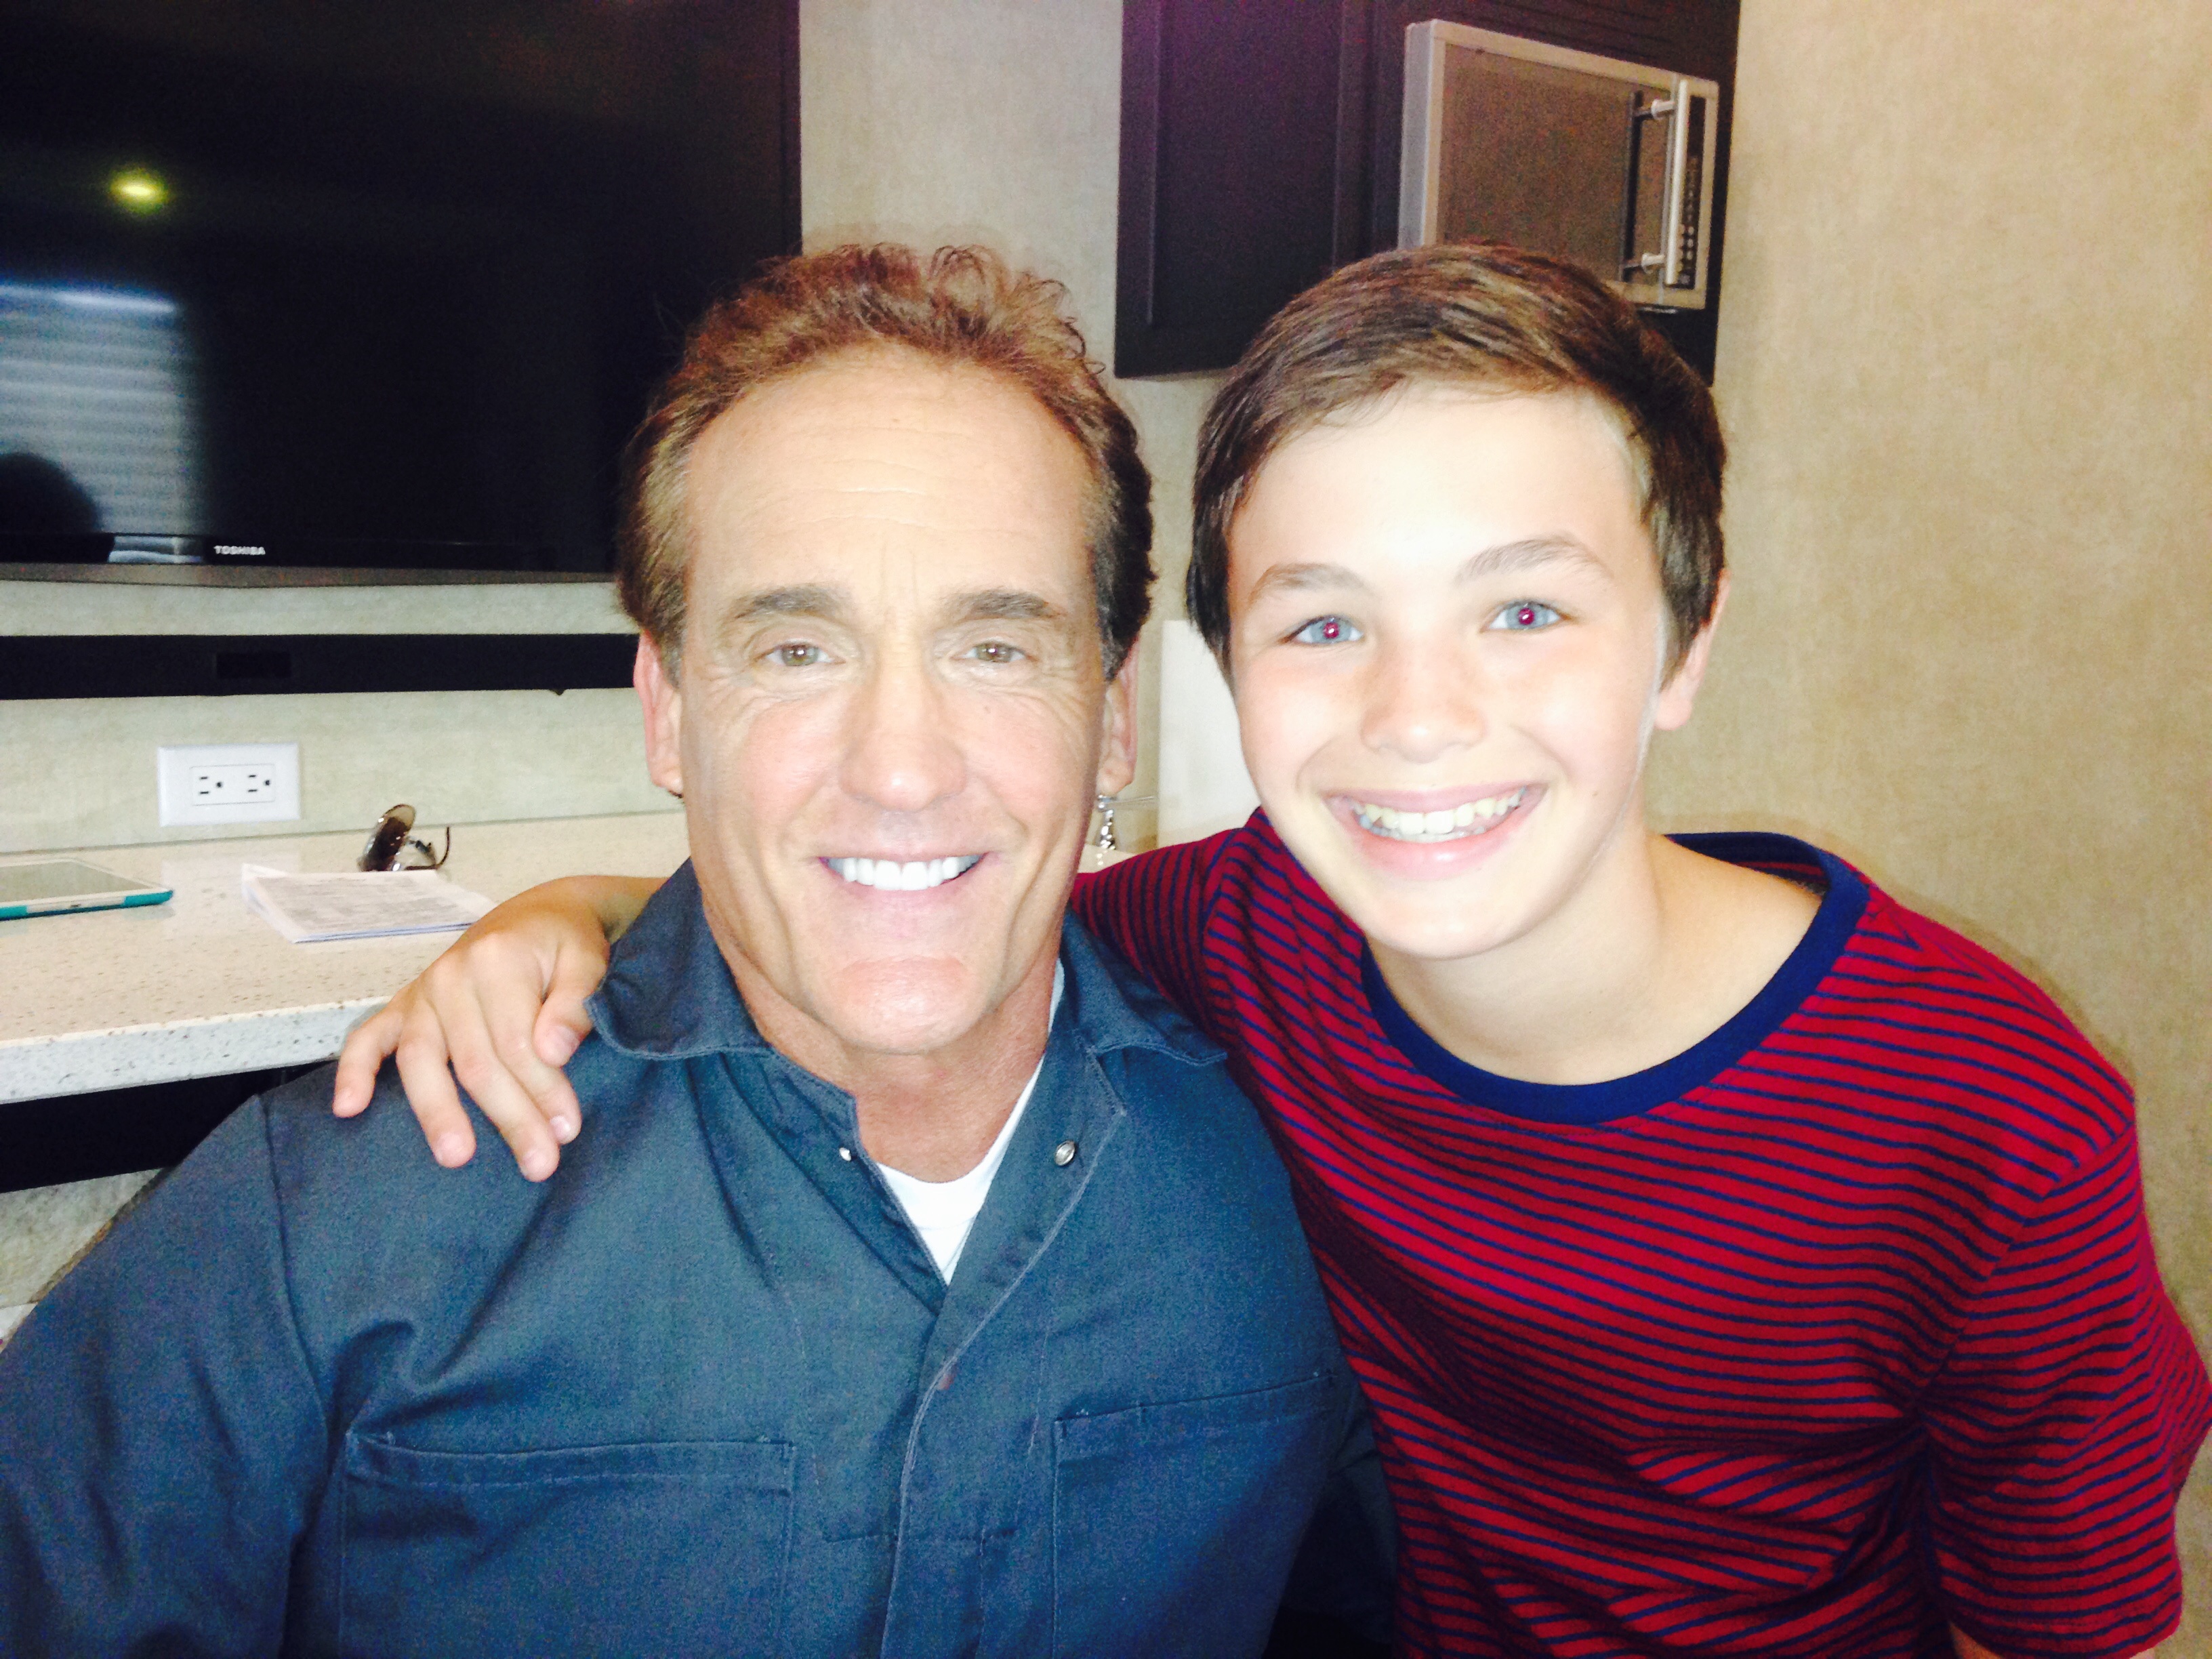 Actor John Wesley Shipp and Logan Williams on the set of 